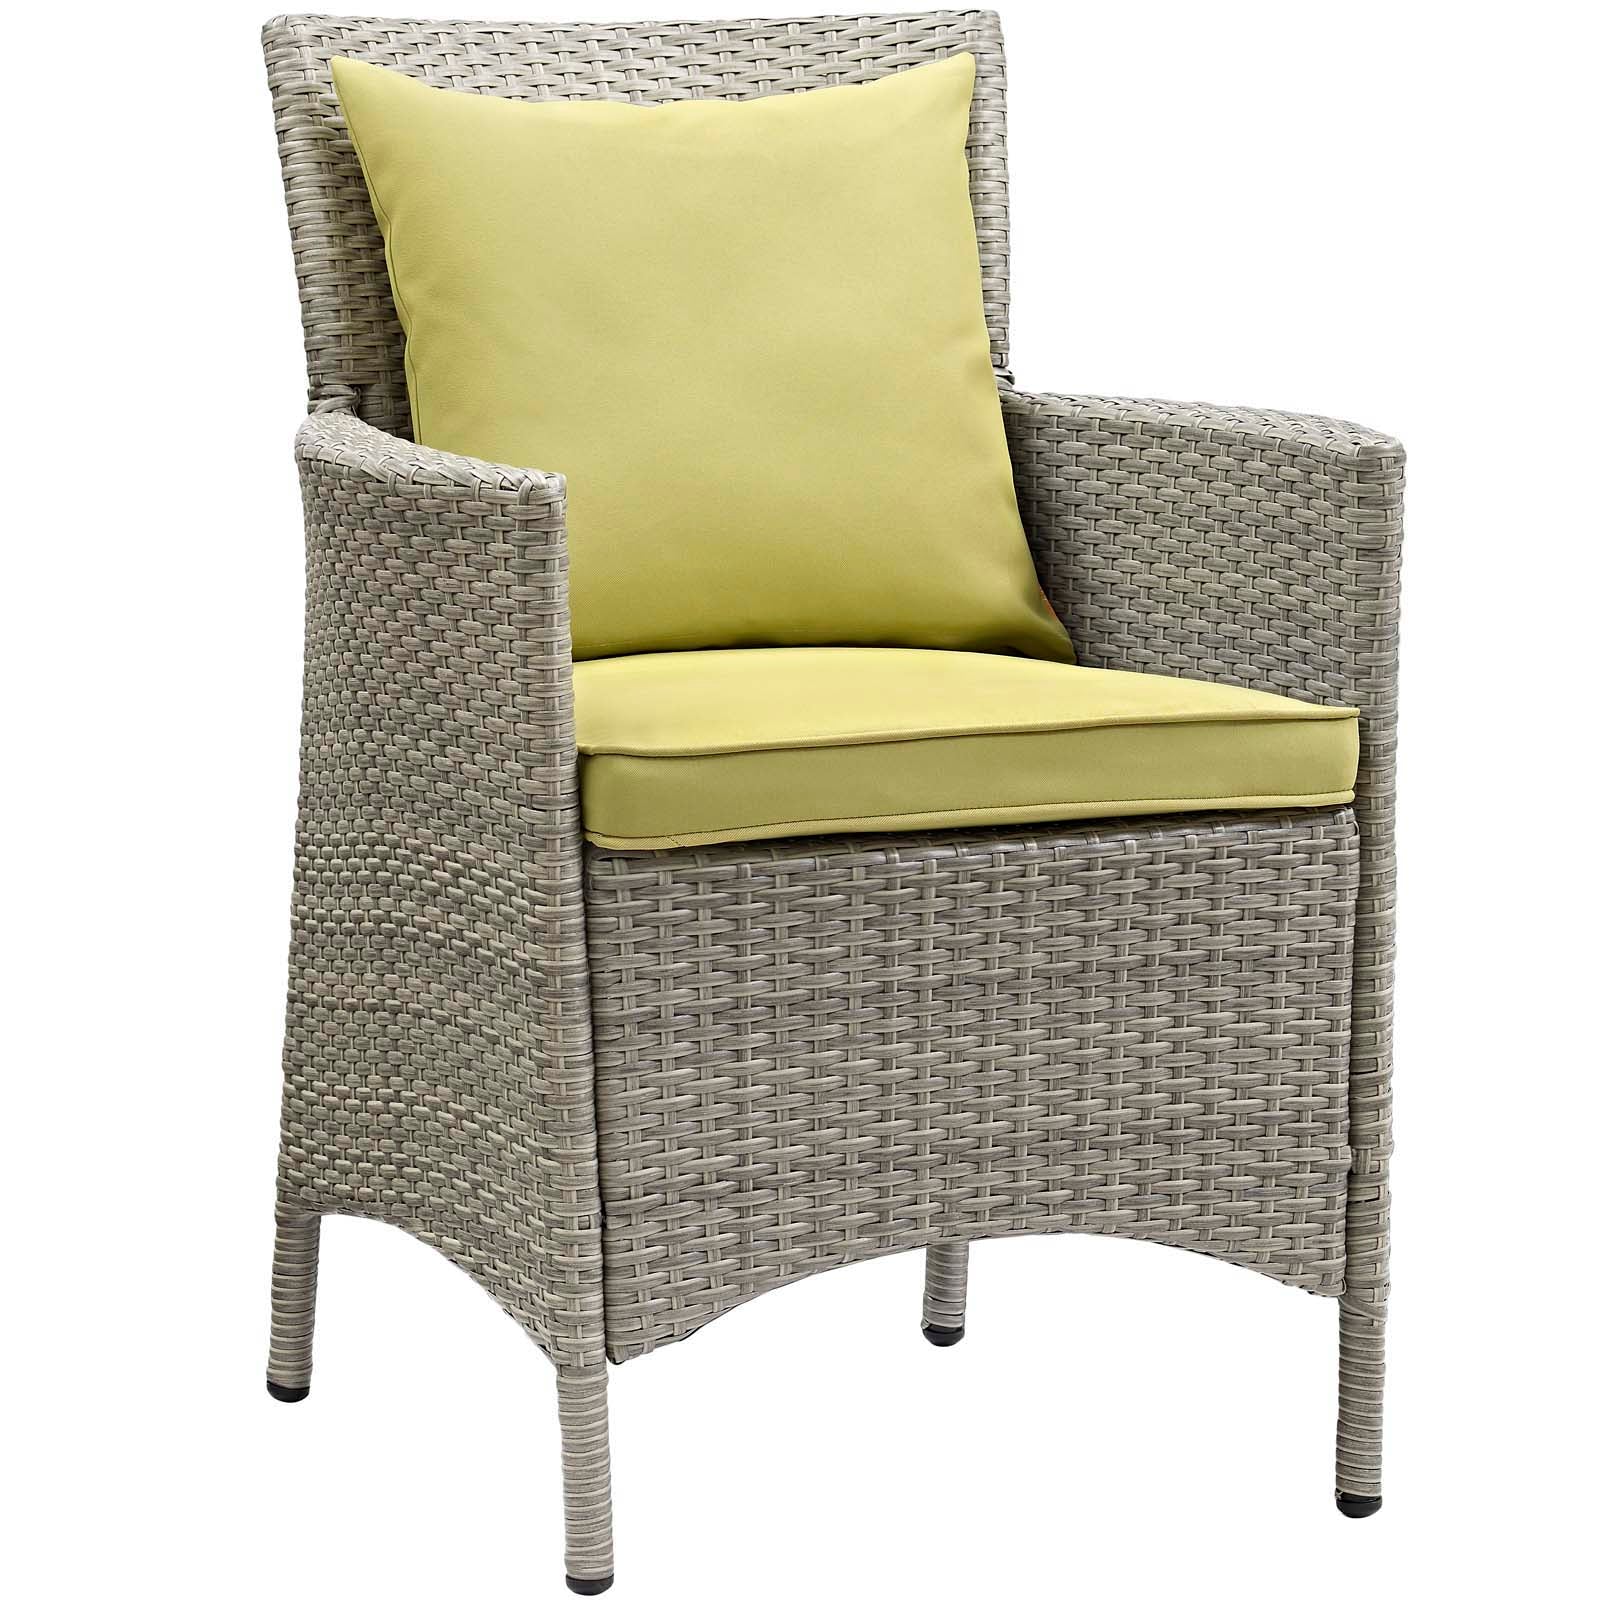 Modway Outdoor Dining Chairs - Conduit Outdoor Patio Wicker Rattan Dining Armchair Set of 2 Light Gray Peridot